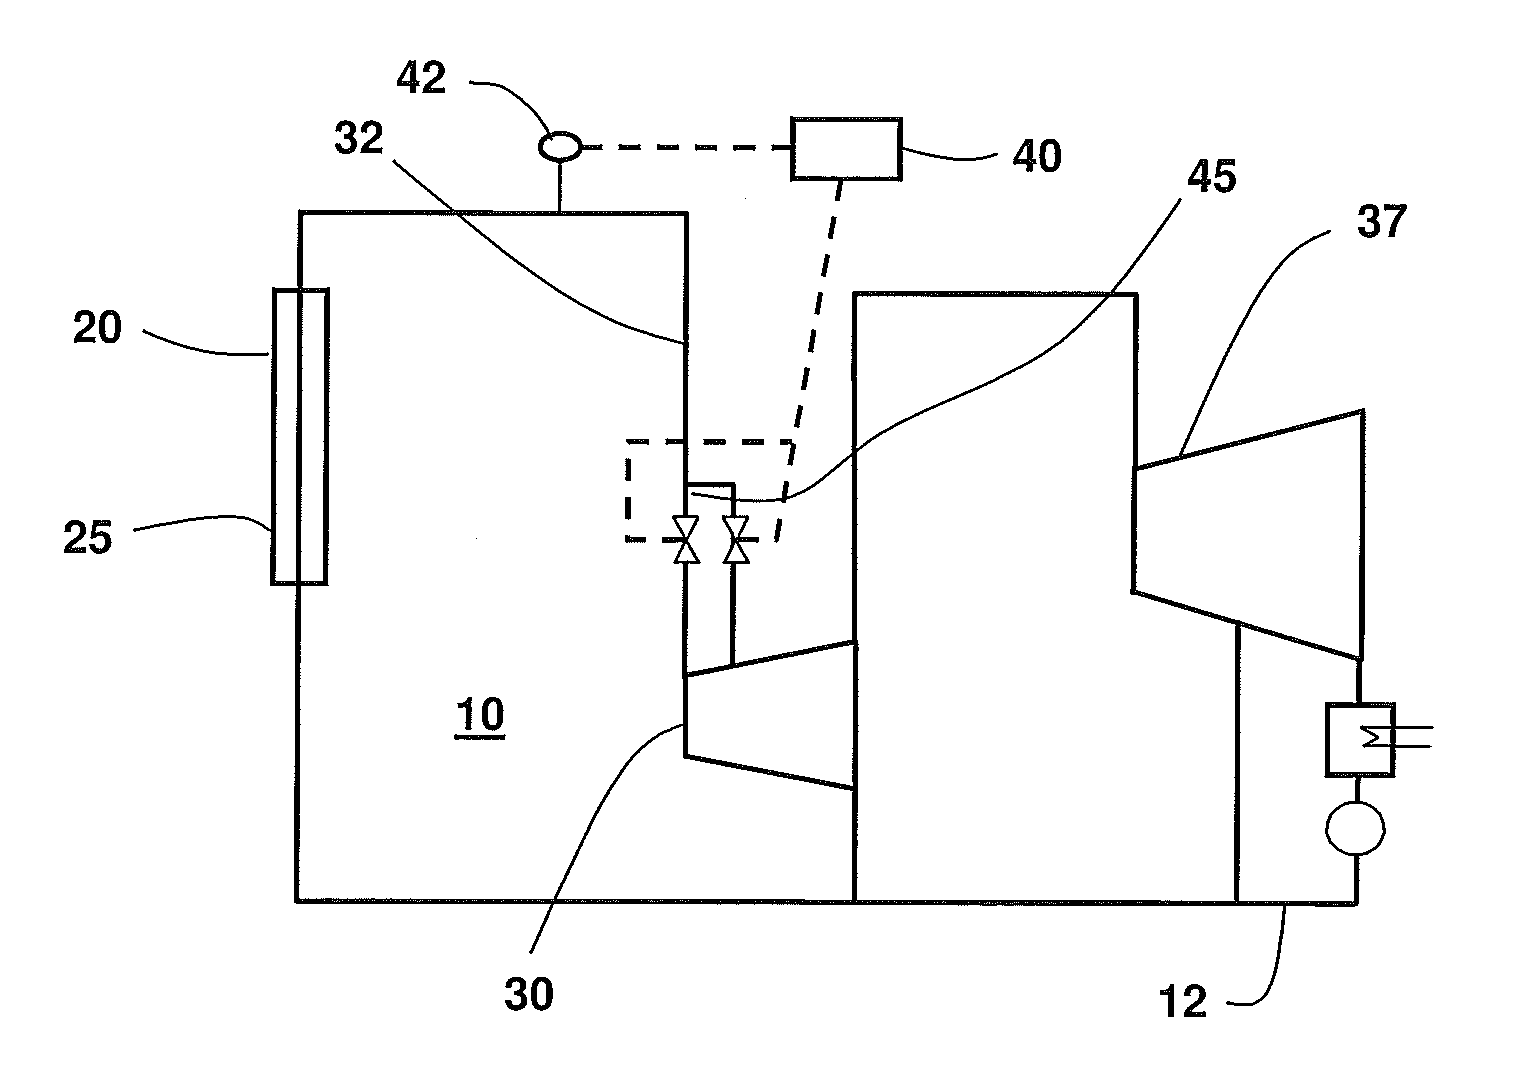 Steam rankine cycle solar plant and method for operating such plants